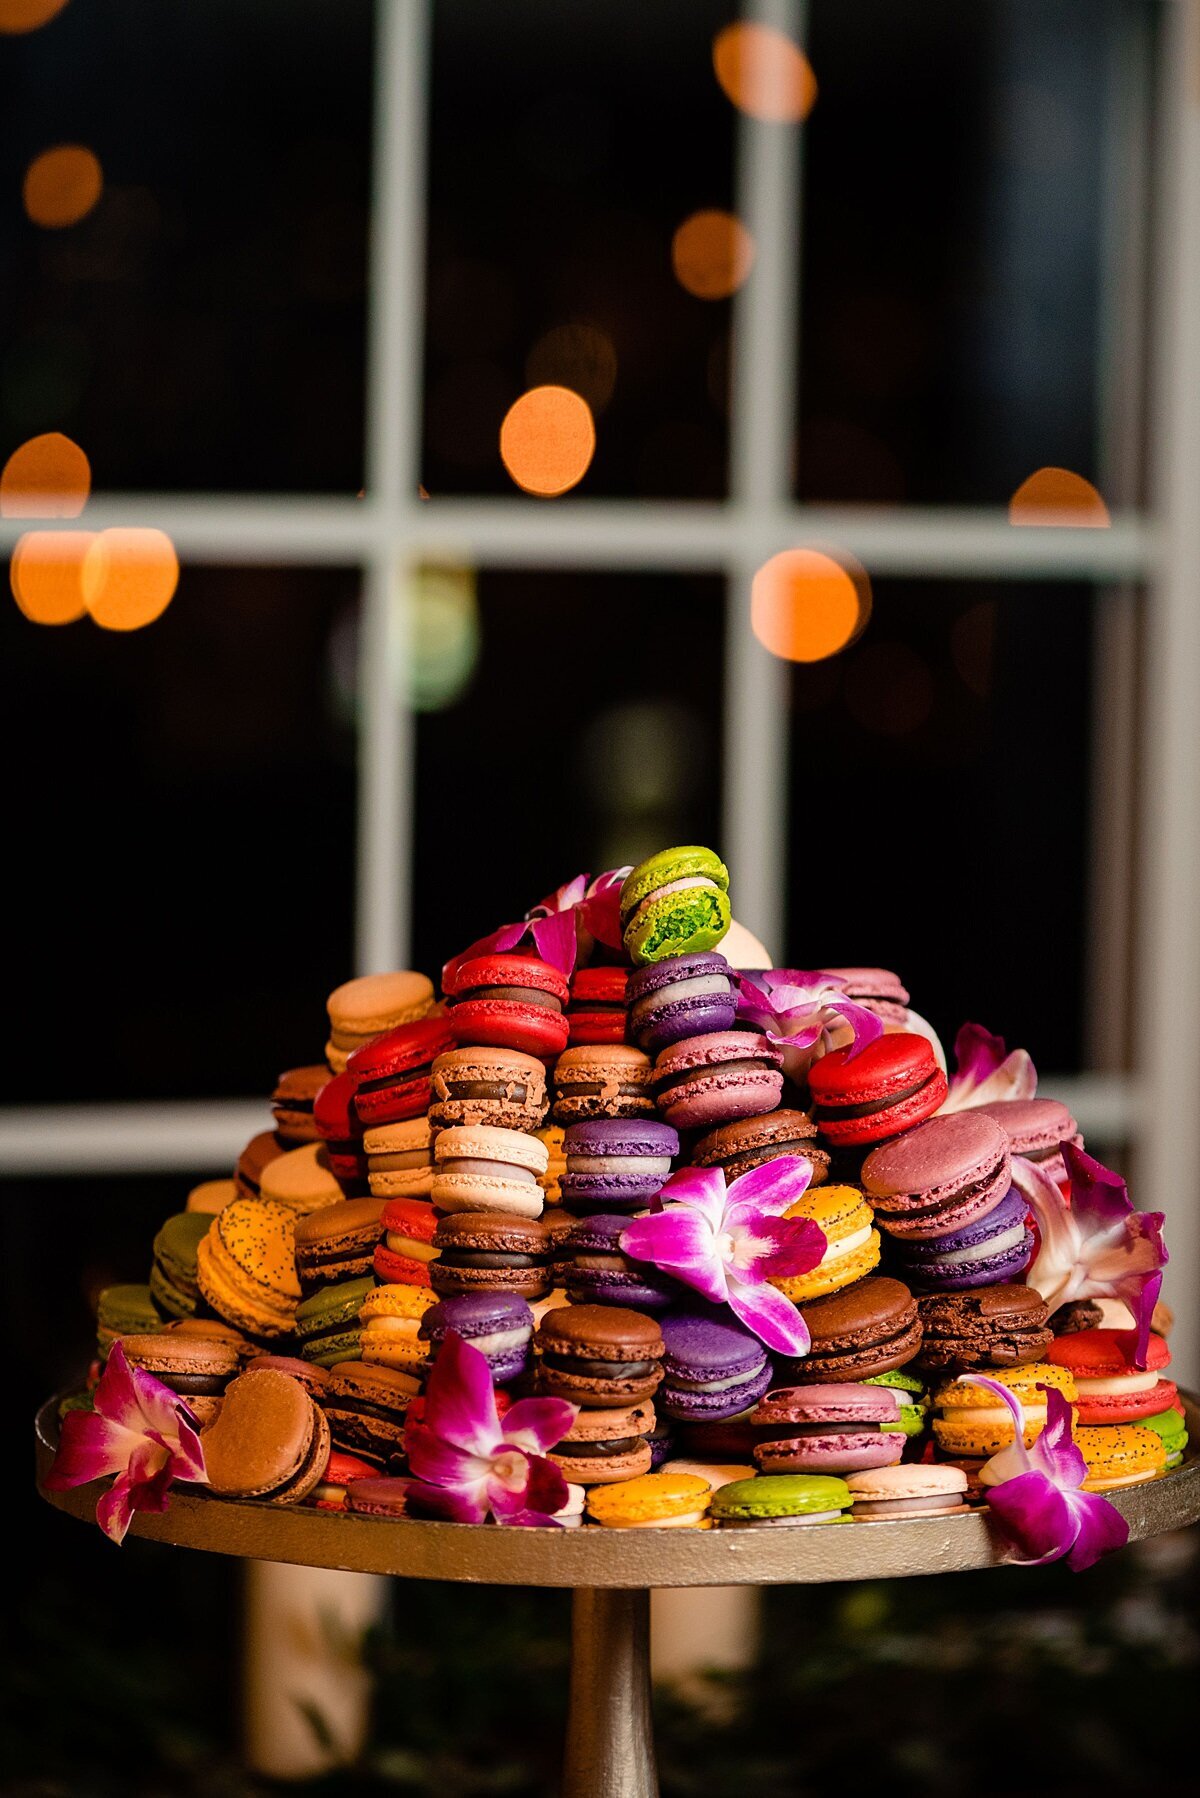 Mini macaroons stacked together on golden tray to make a tower